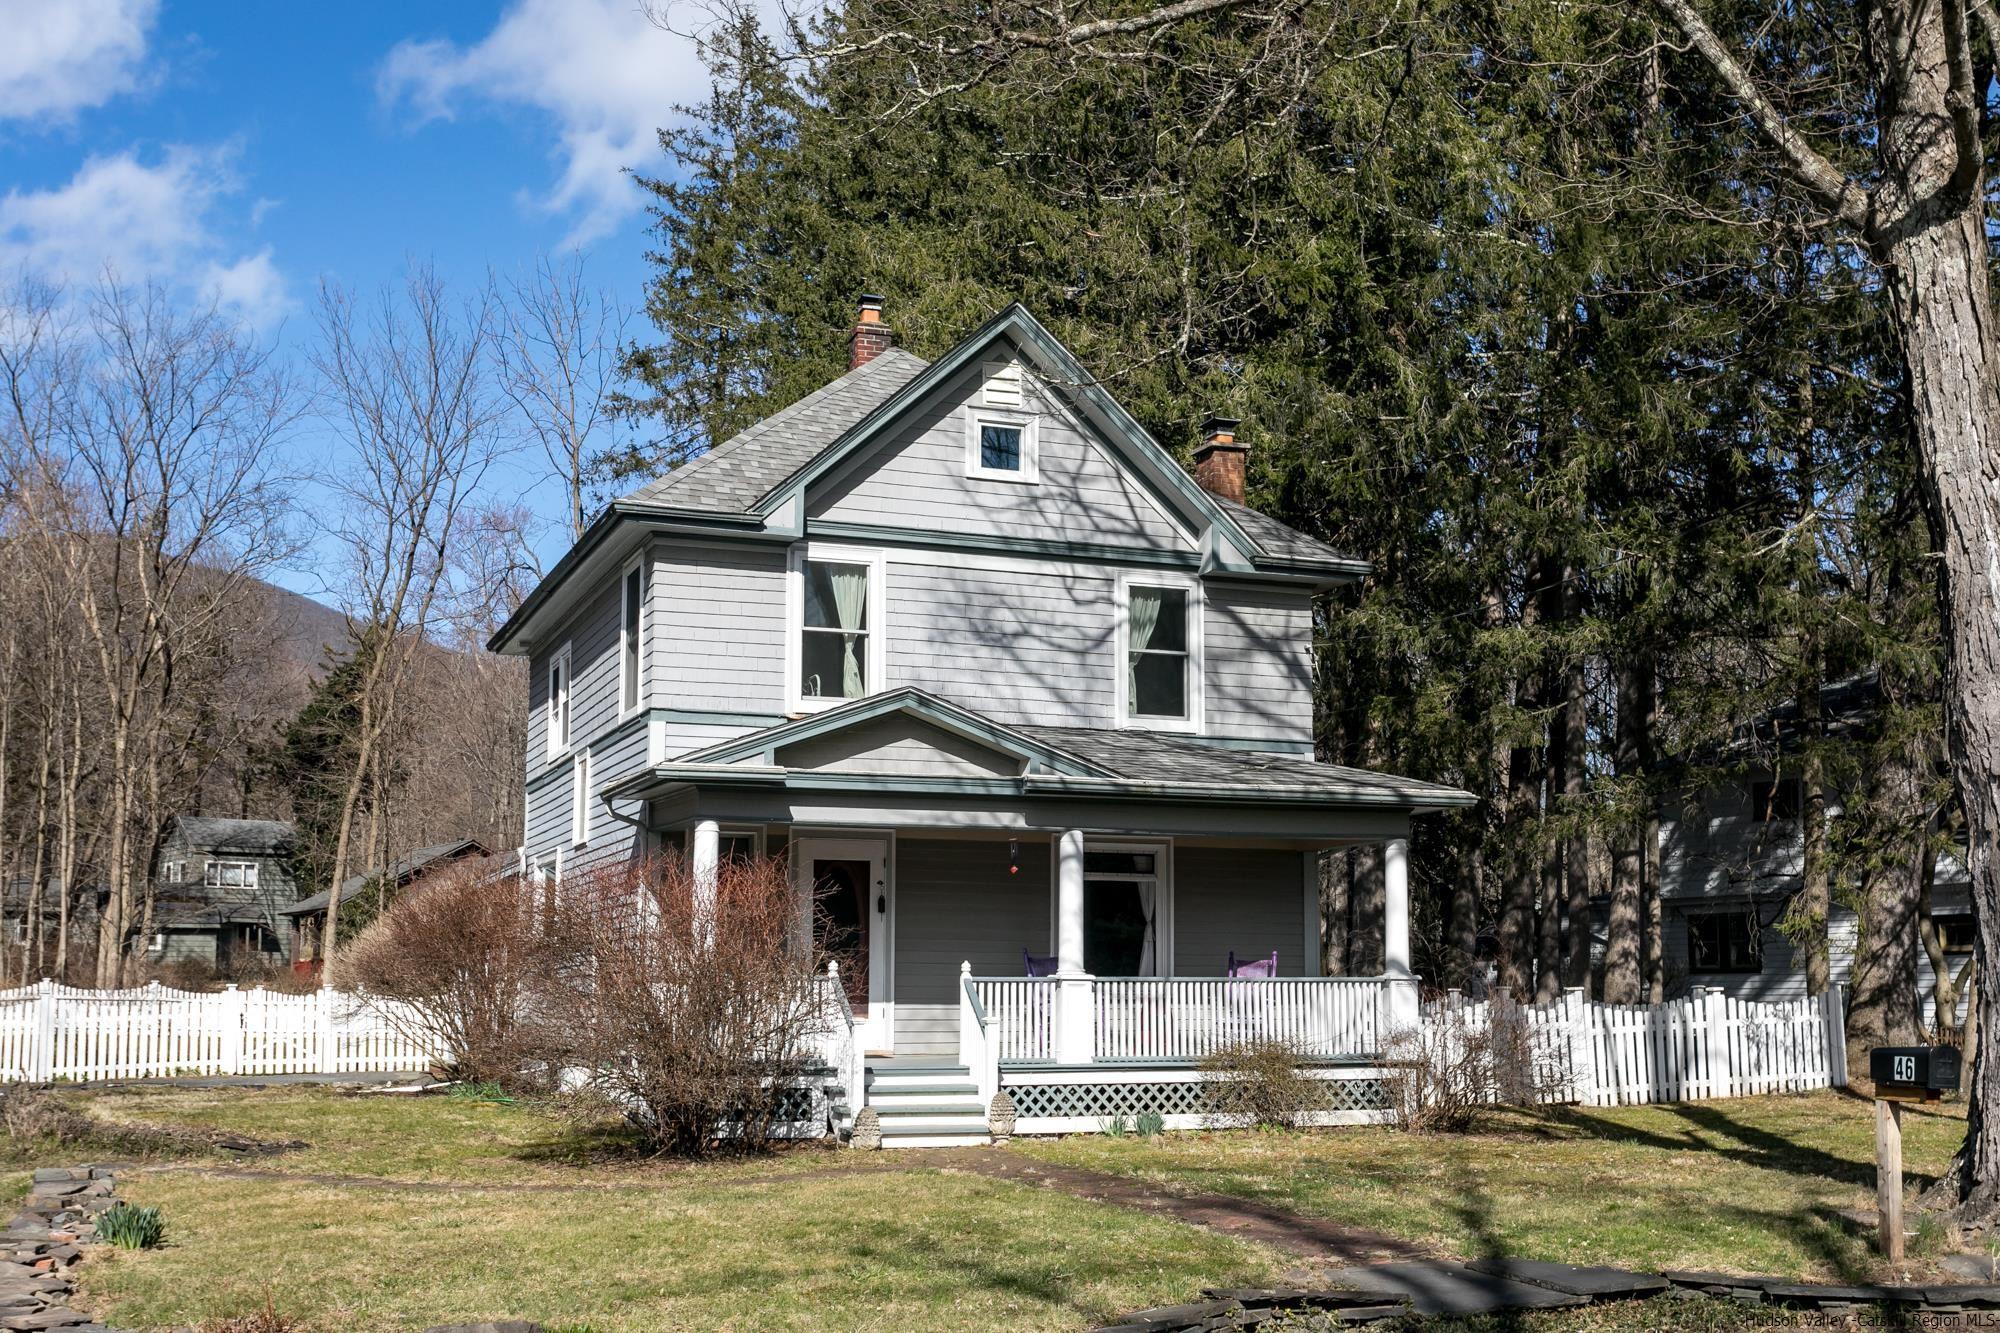 46 Lower Byrdcliffe, Woodstock, NY 